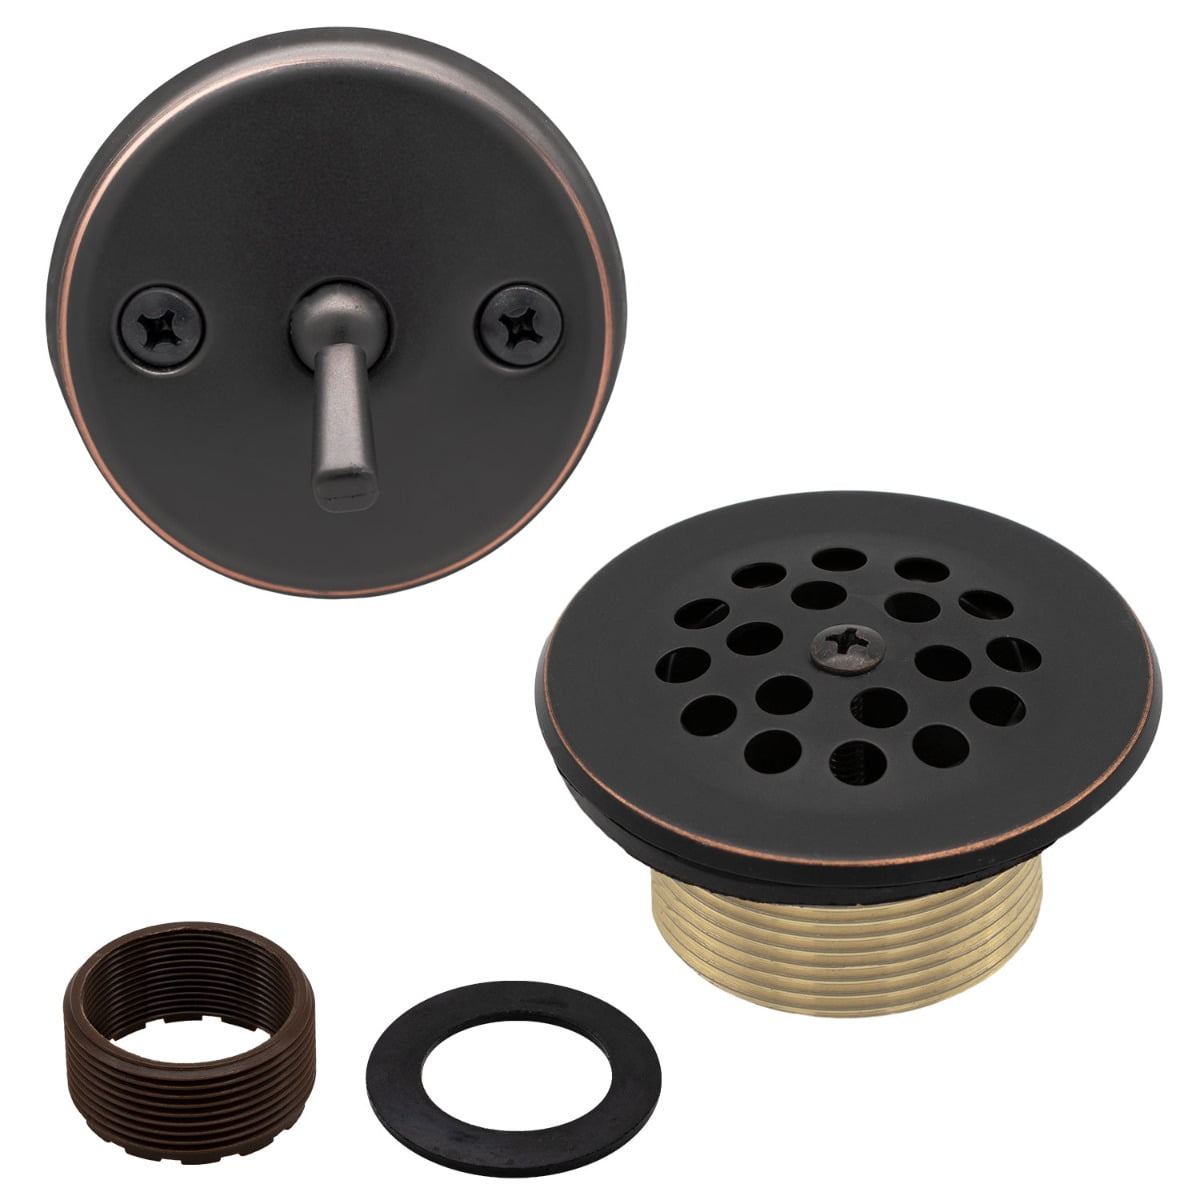 NEW toilet cistern 3/4 hole & lever overflow stopper plug,cover with washer 